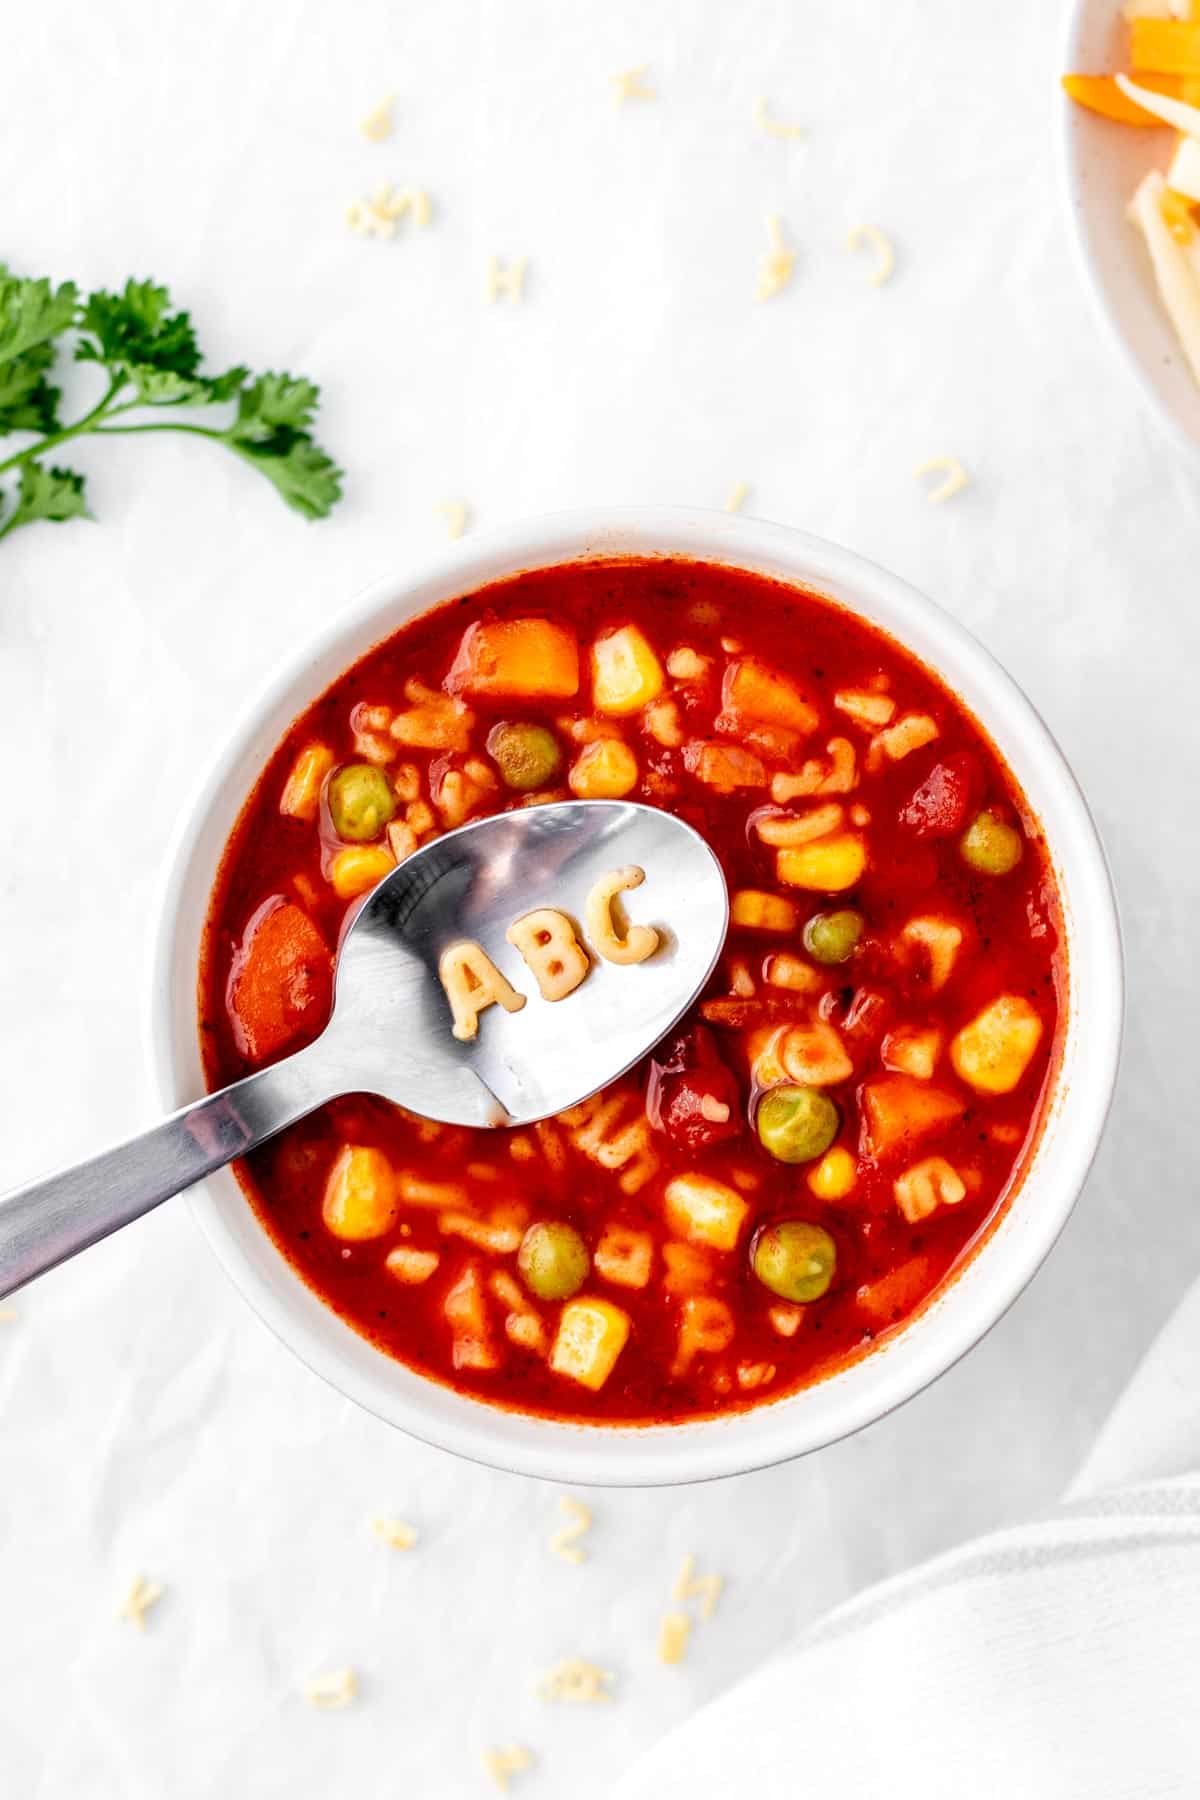 A bowl of tomato alphabet soup with "ABC" letters on a spoon.